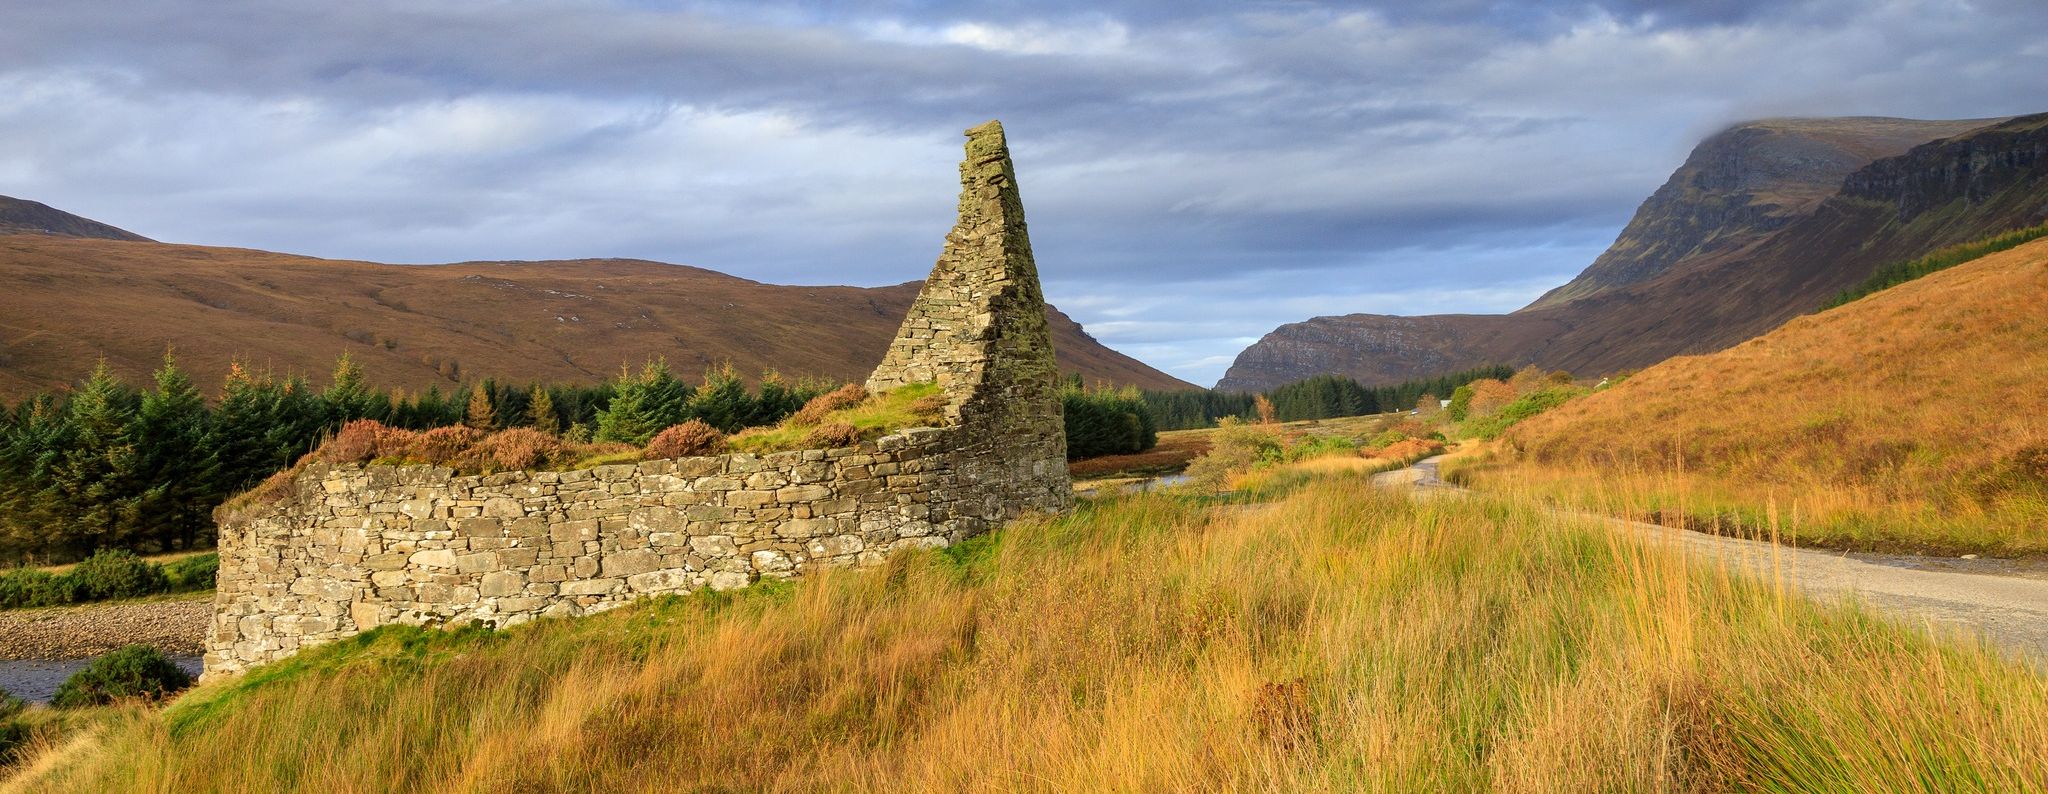 Ben Hope and Pictish Tower ( Broch ) of Dun Dornaigil at trailhead for Ben Hope in Highlands of Northern Scotland